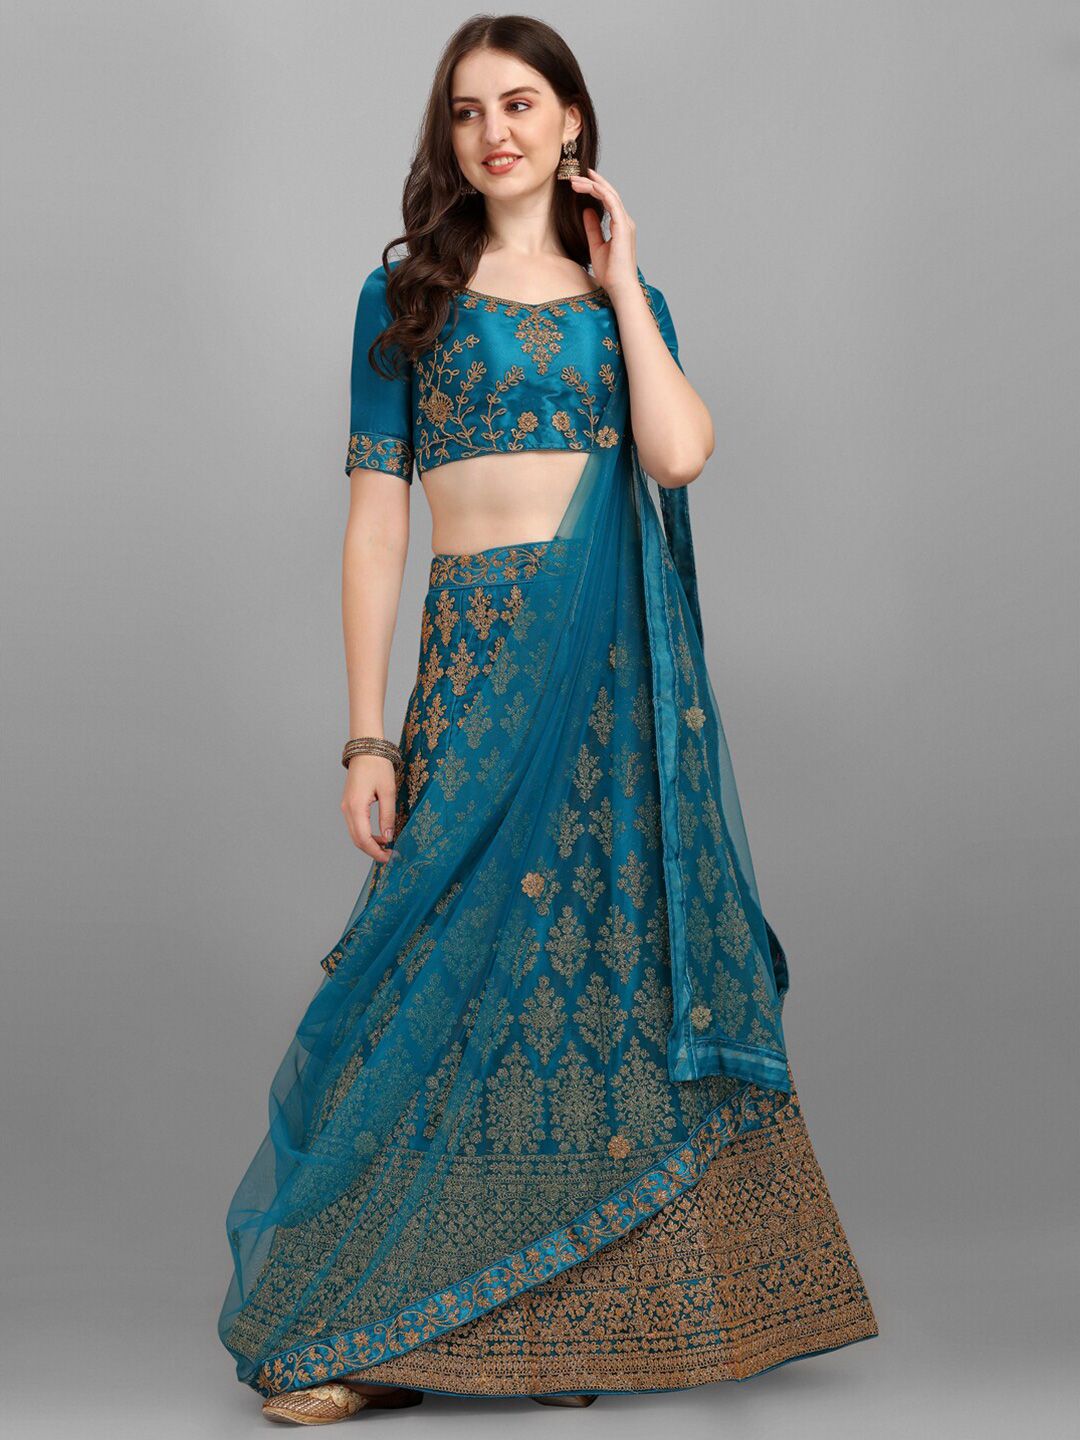 LABEL AARNA Blue & Gold-Toned Embroidered Semi-Stitched Lehenga & Unstitched Blouse With Dupatta Price in India